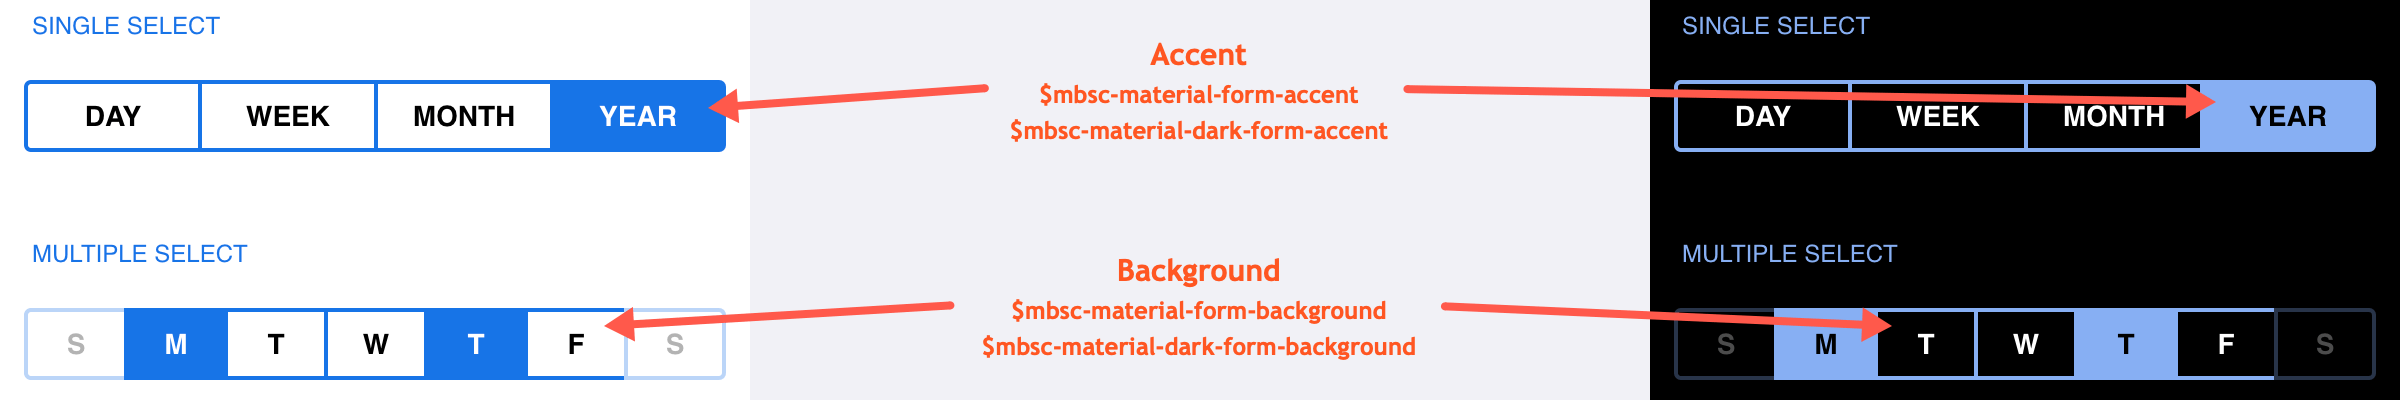 Material theme variables for the Segmented component